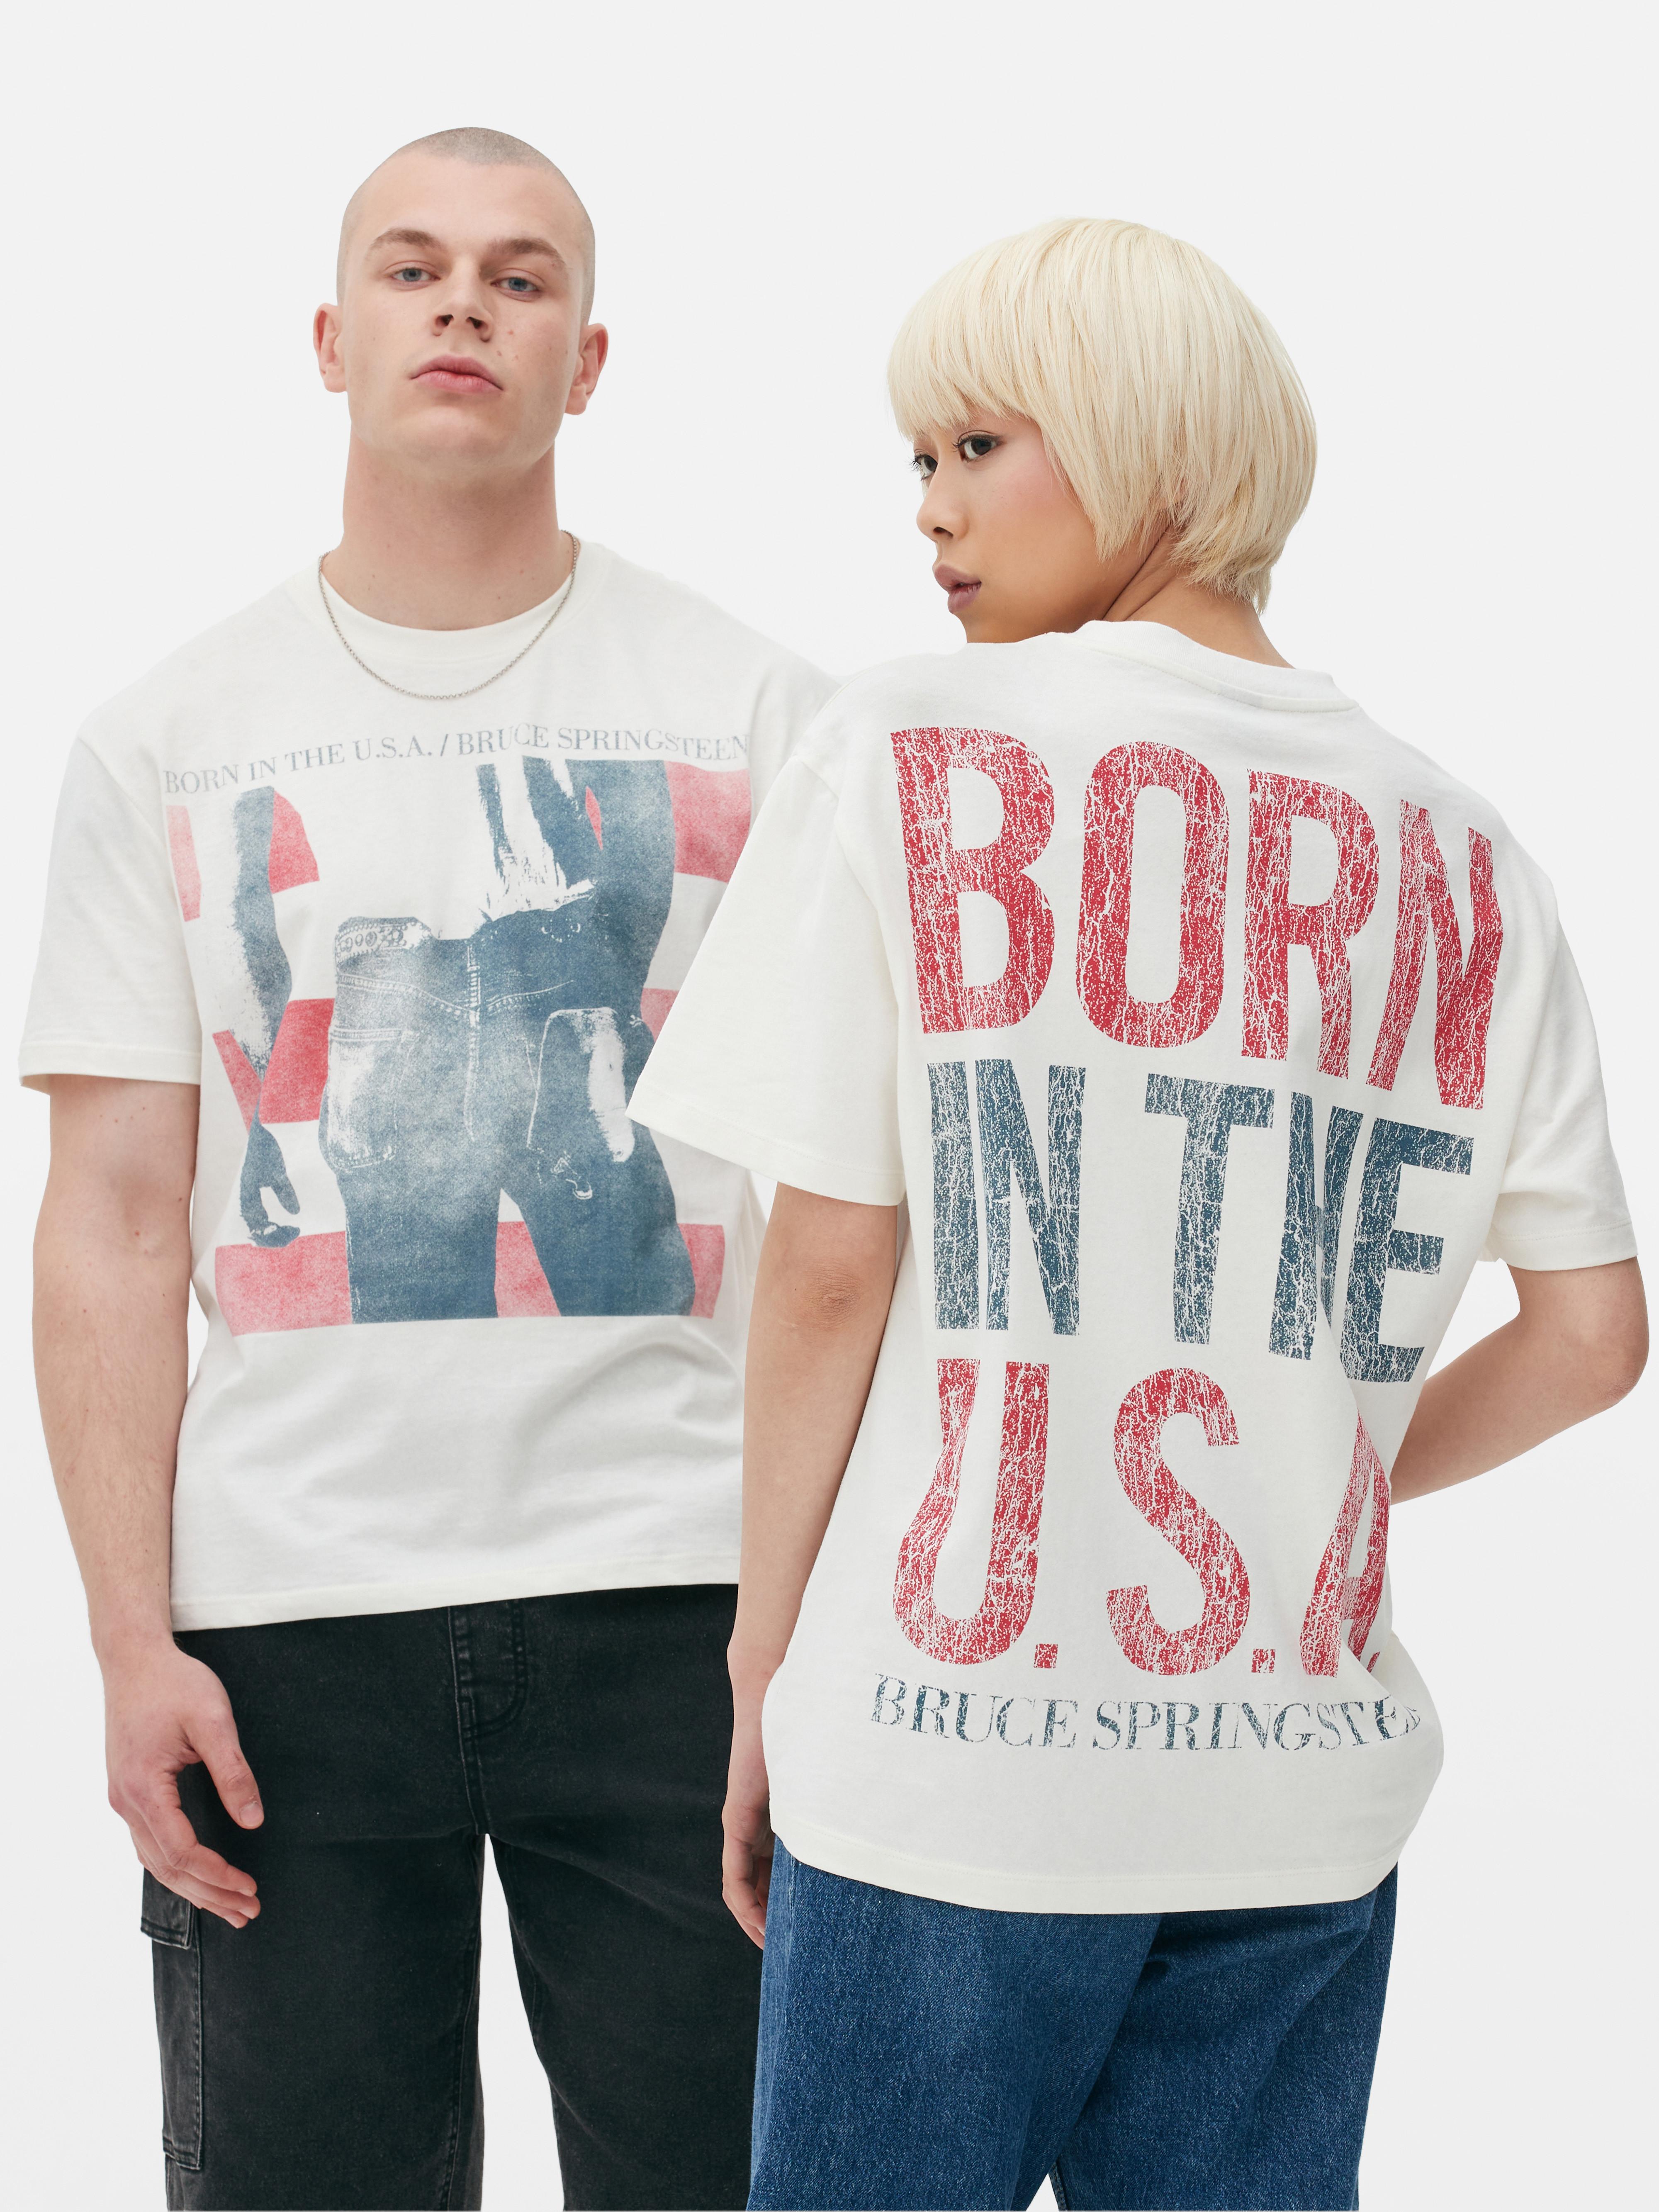 „Bruce Springsteen Born in the USA“ T-Shirt